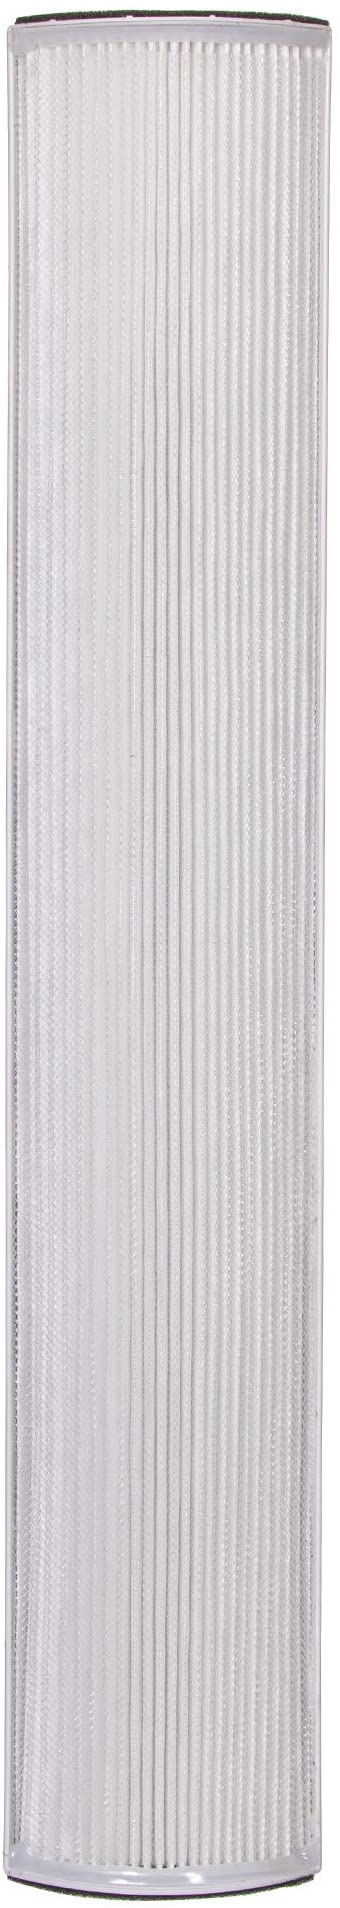 Climestar Premium Compatible TPP240F True HEPA Filter Replacement for Therapure TPP240 Air Purifiers